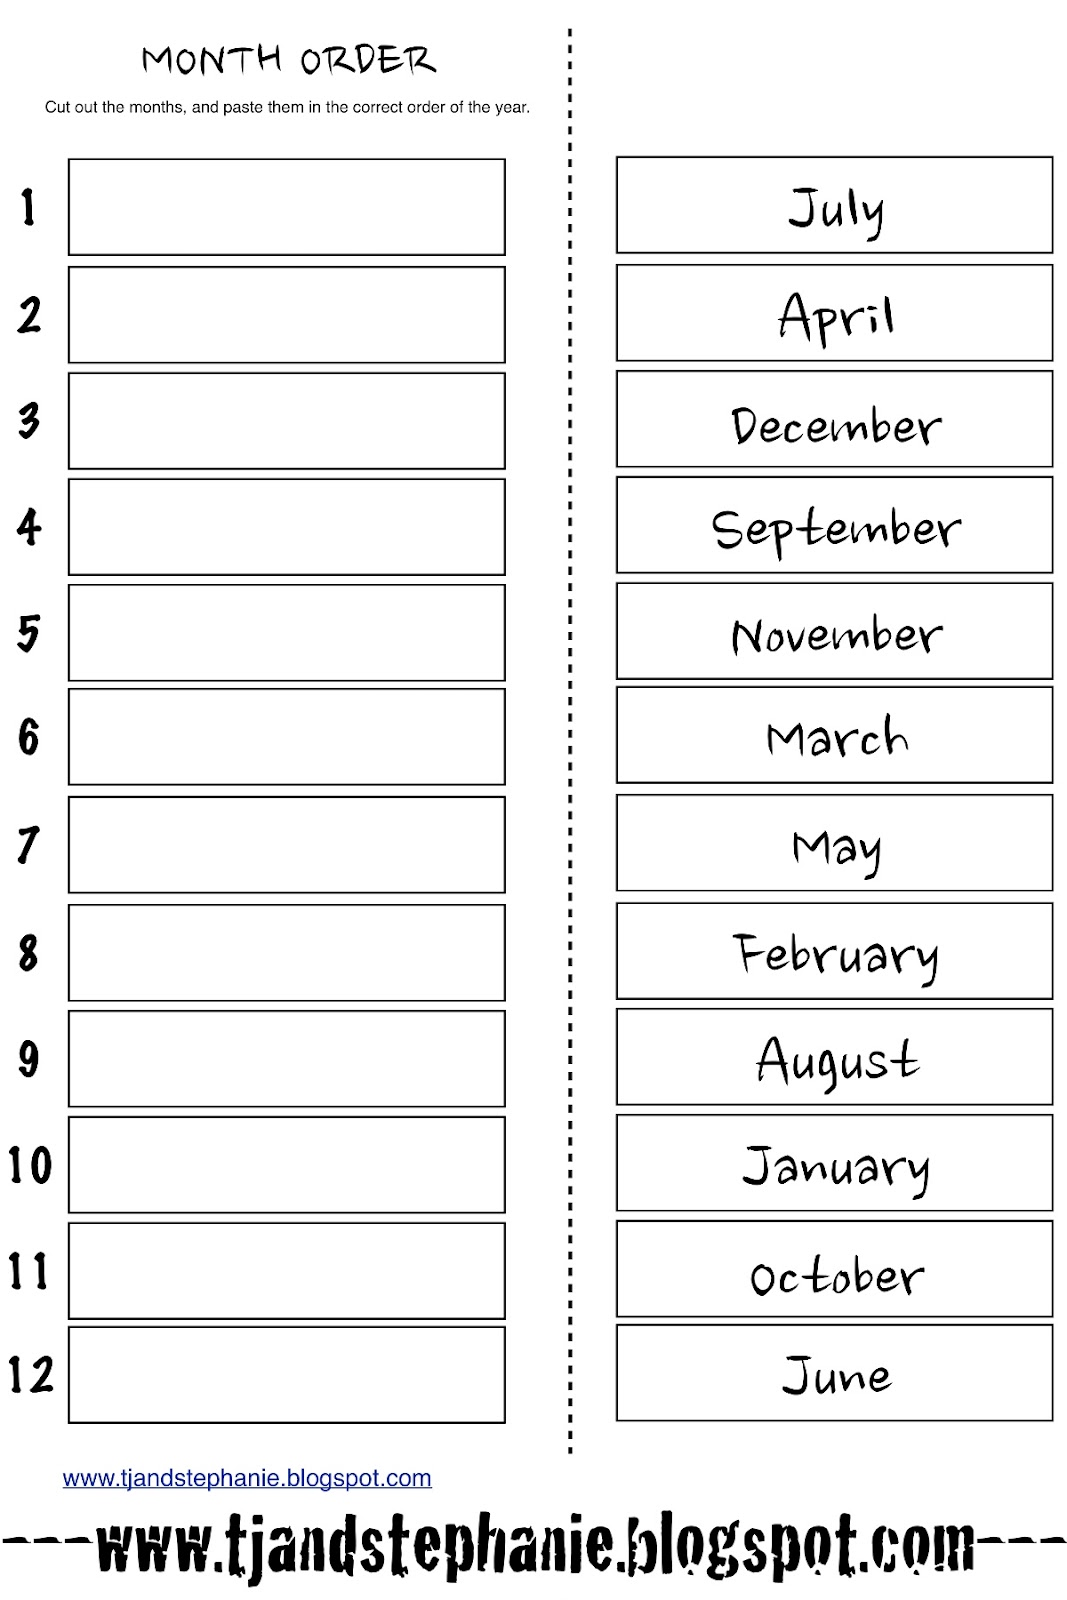 Months of the Year Cut and Paste Worksheets Image